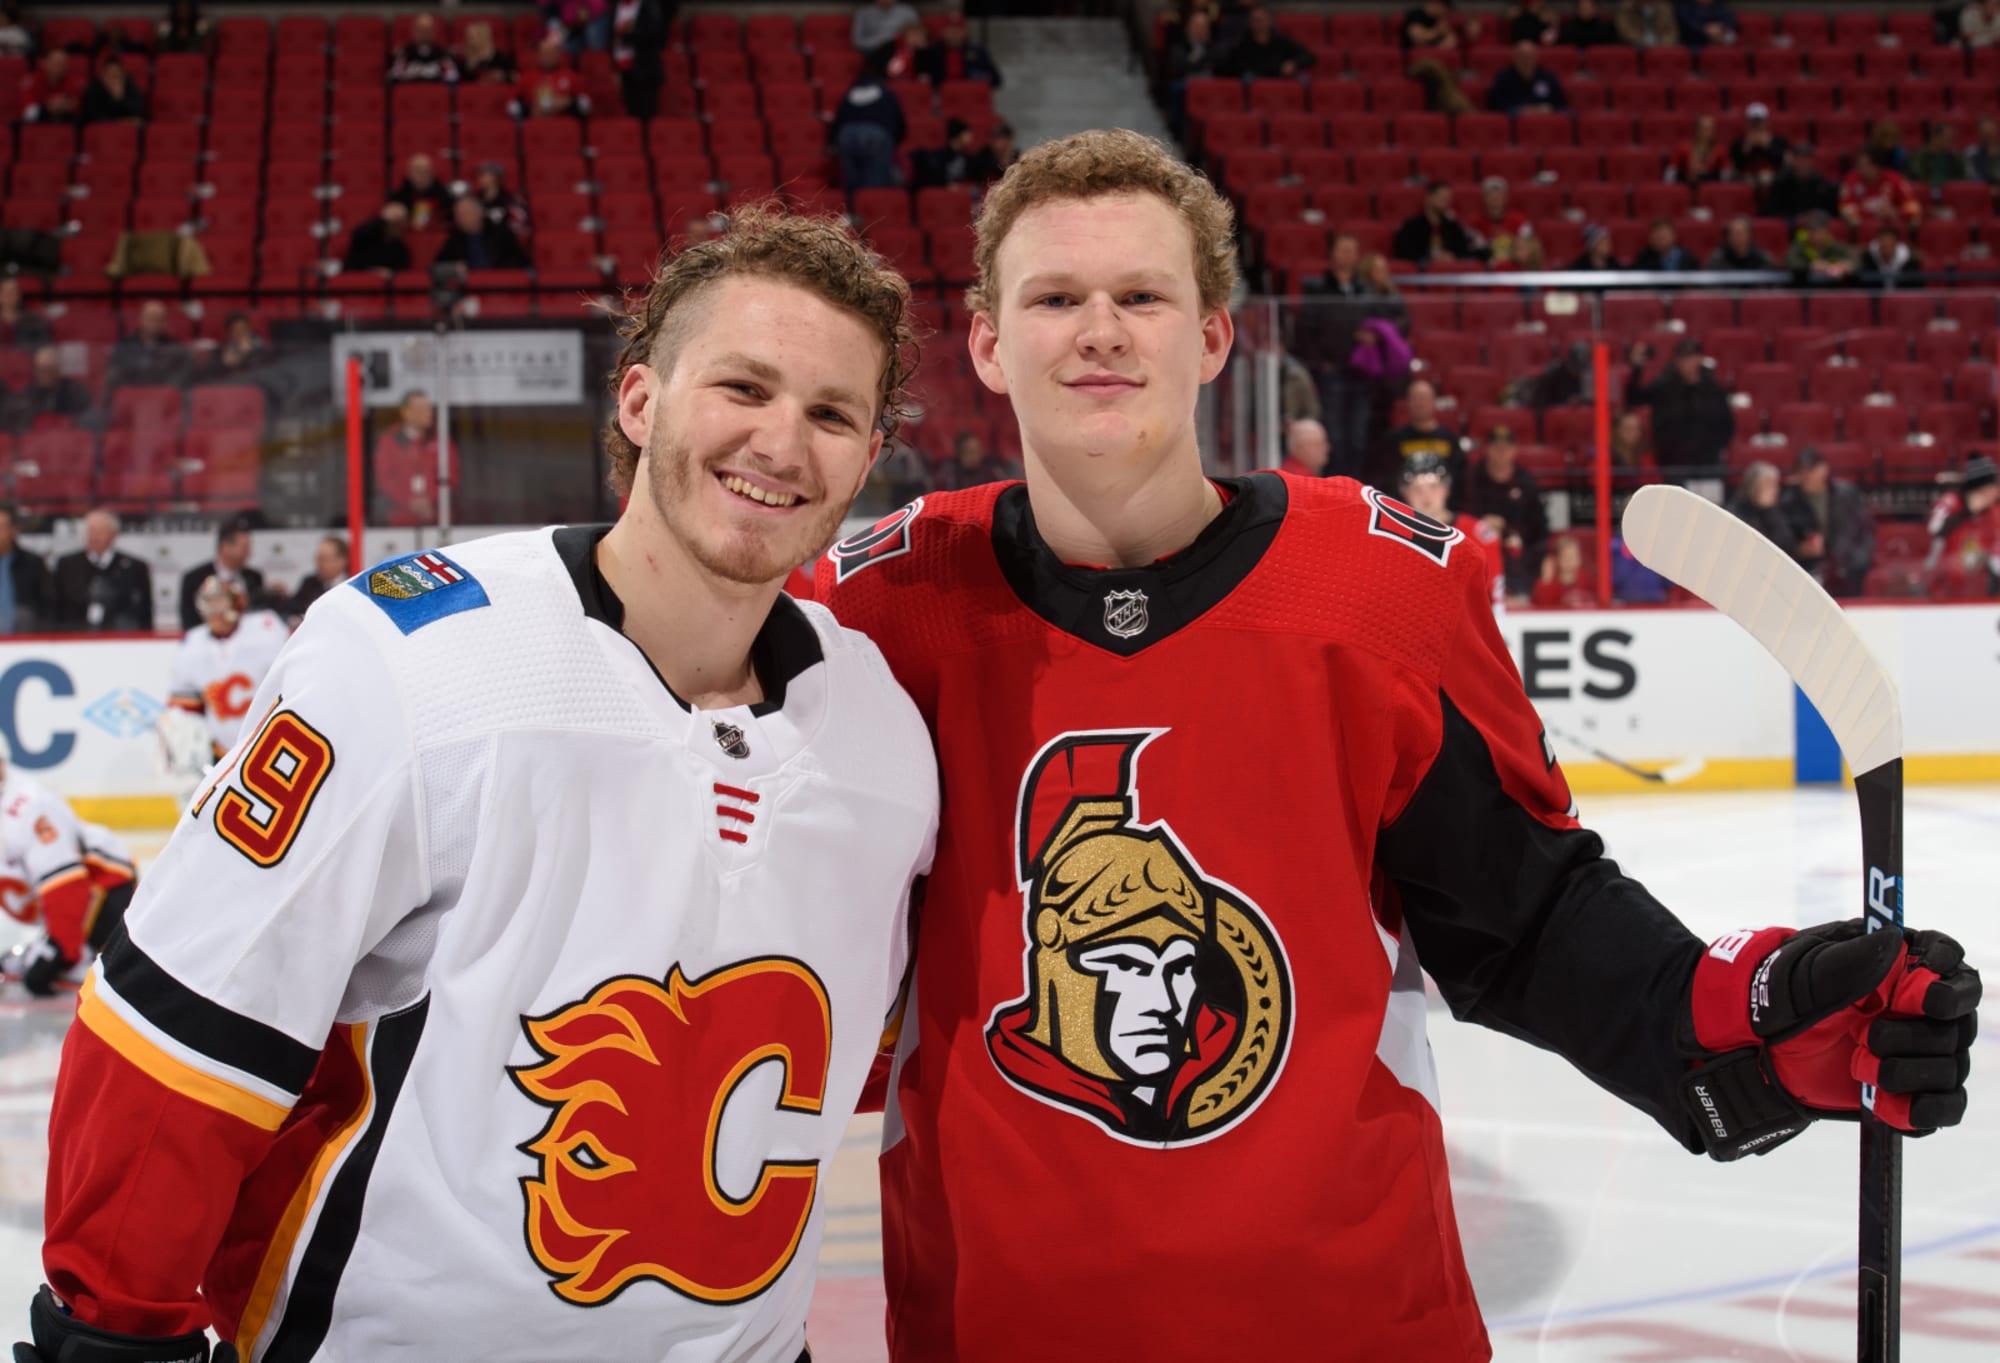 Brady Tkachuk cheers on his brother, Flames in Game 4 